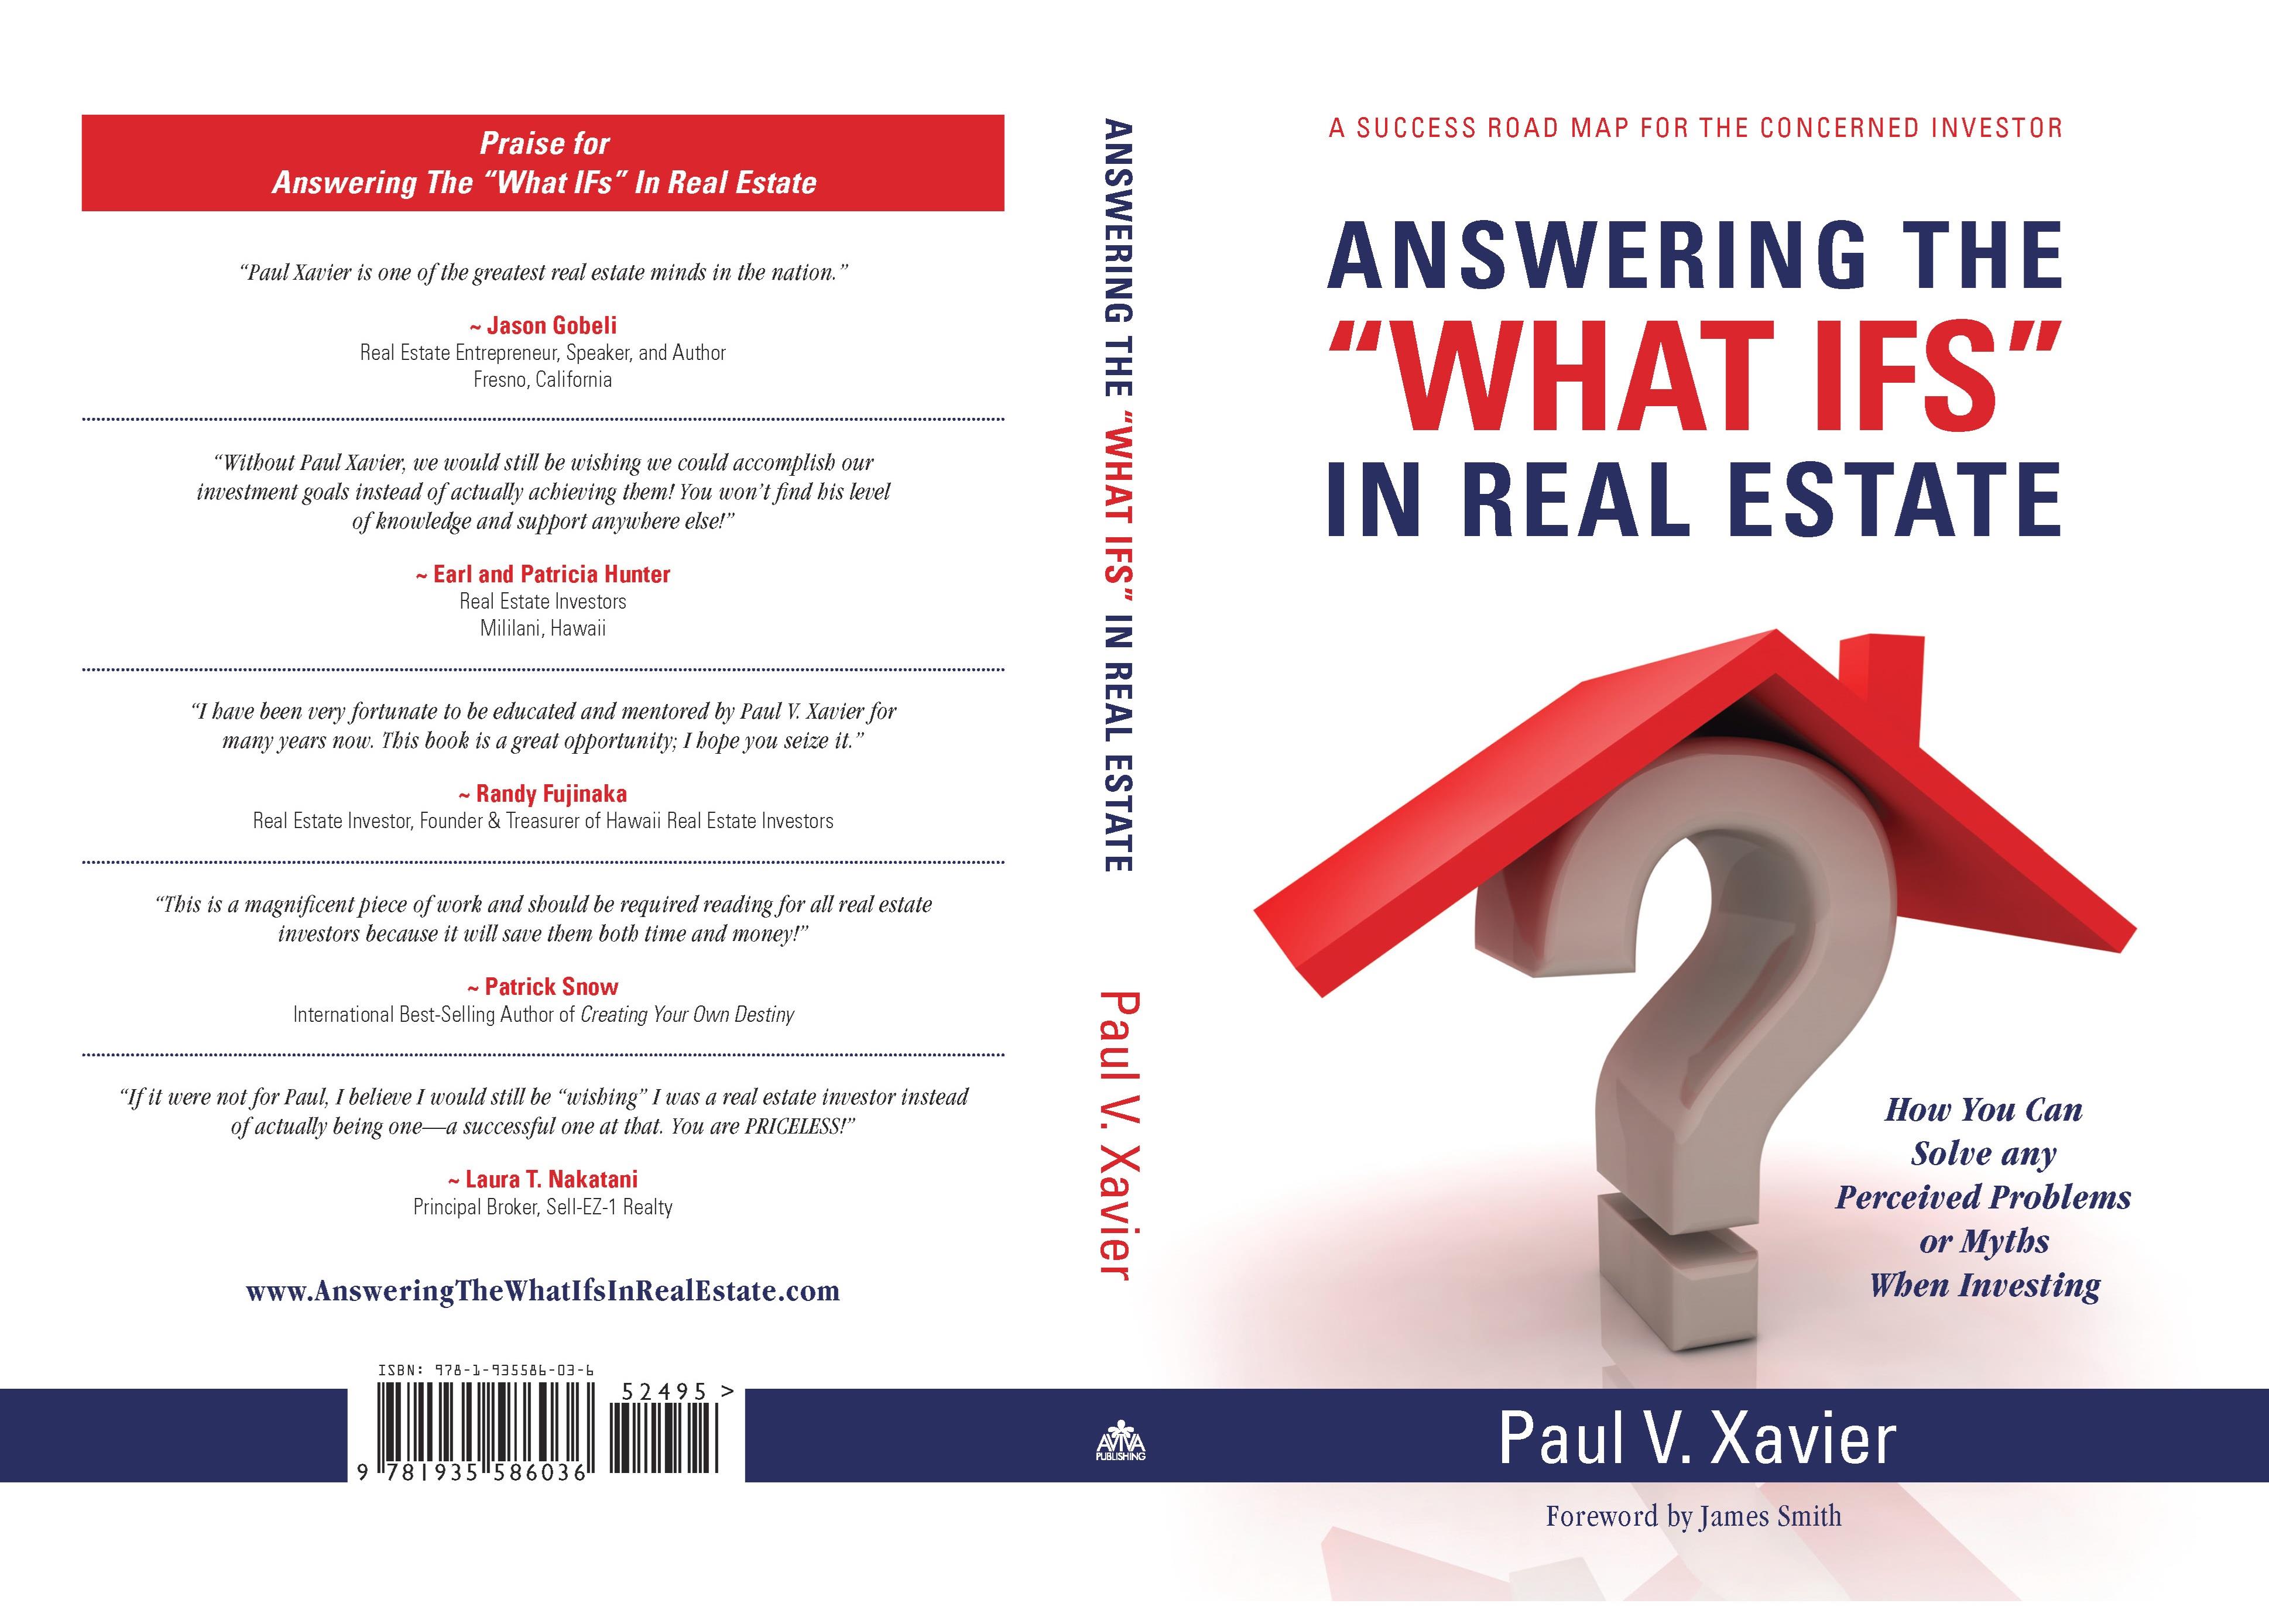 Answering the "What Ifs" in Real Estate cover image